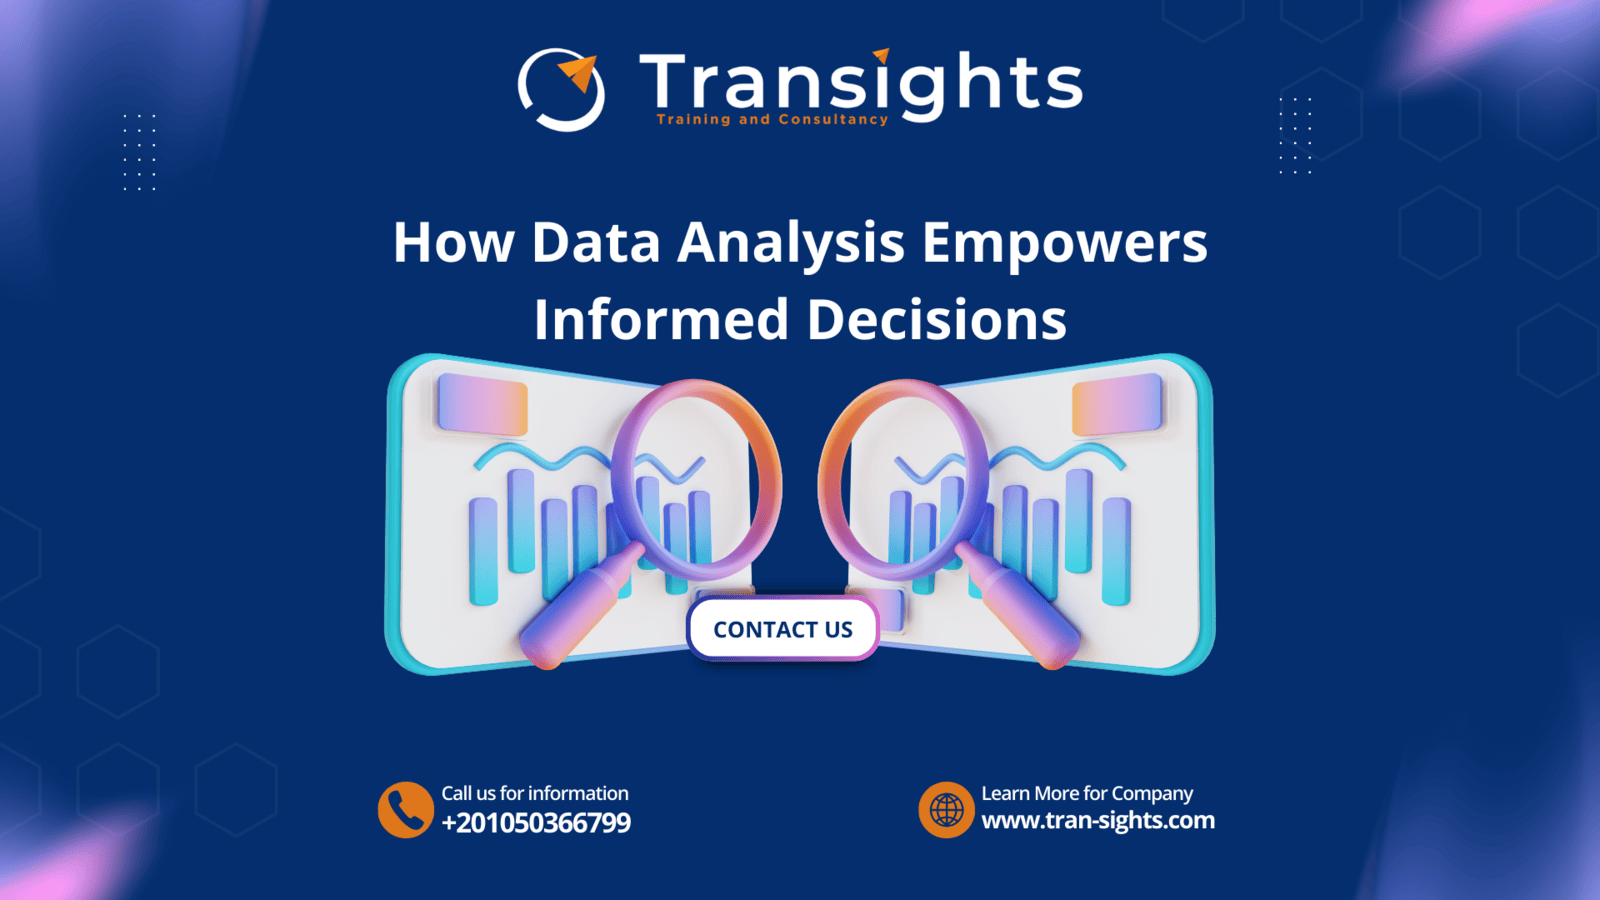 How Data Analysis Empowers Informed Decisions